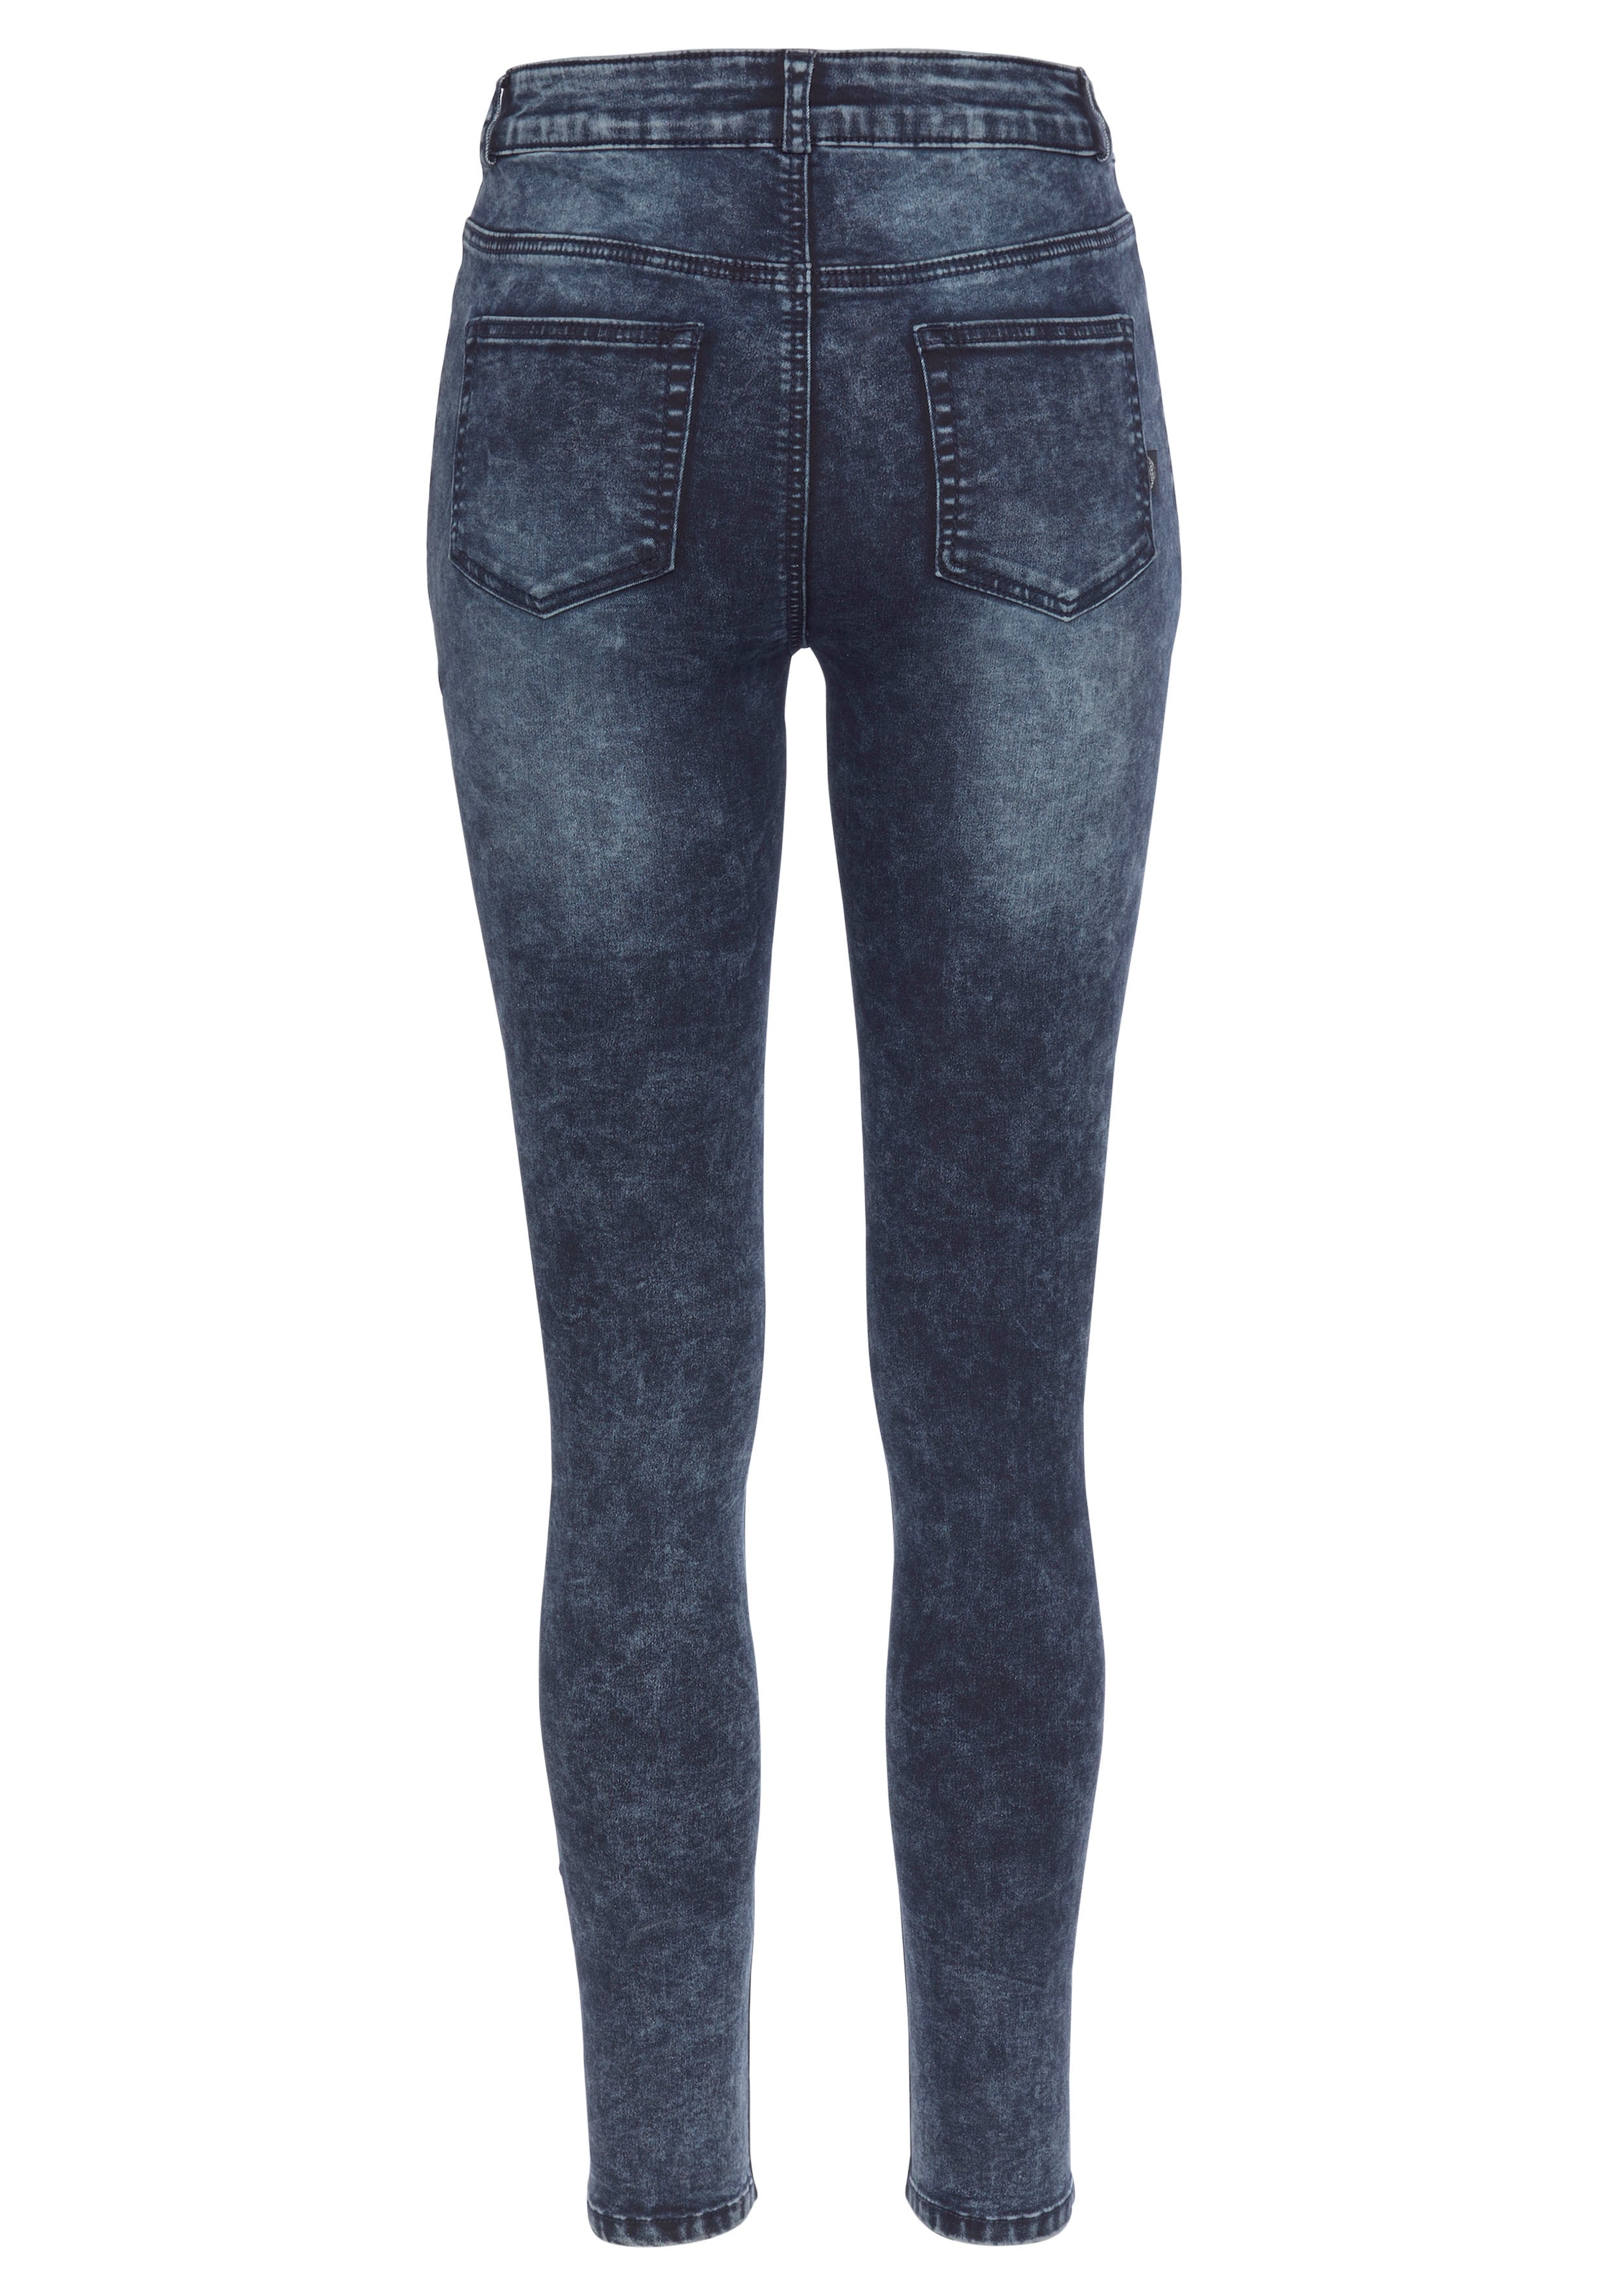 moon | washed«, Jeans Moonwashed Arizona »Ultra walking shoppen Skinny-fit-Jeans Stretch I\'m